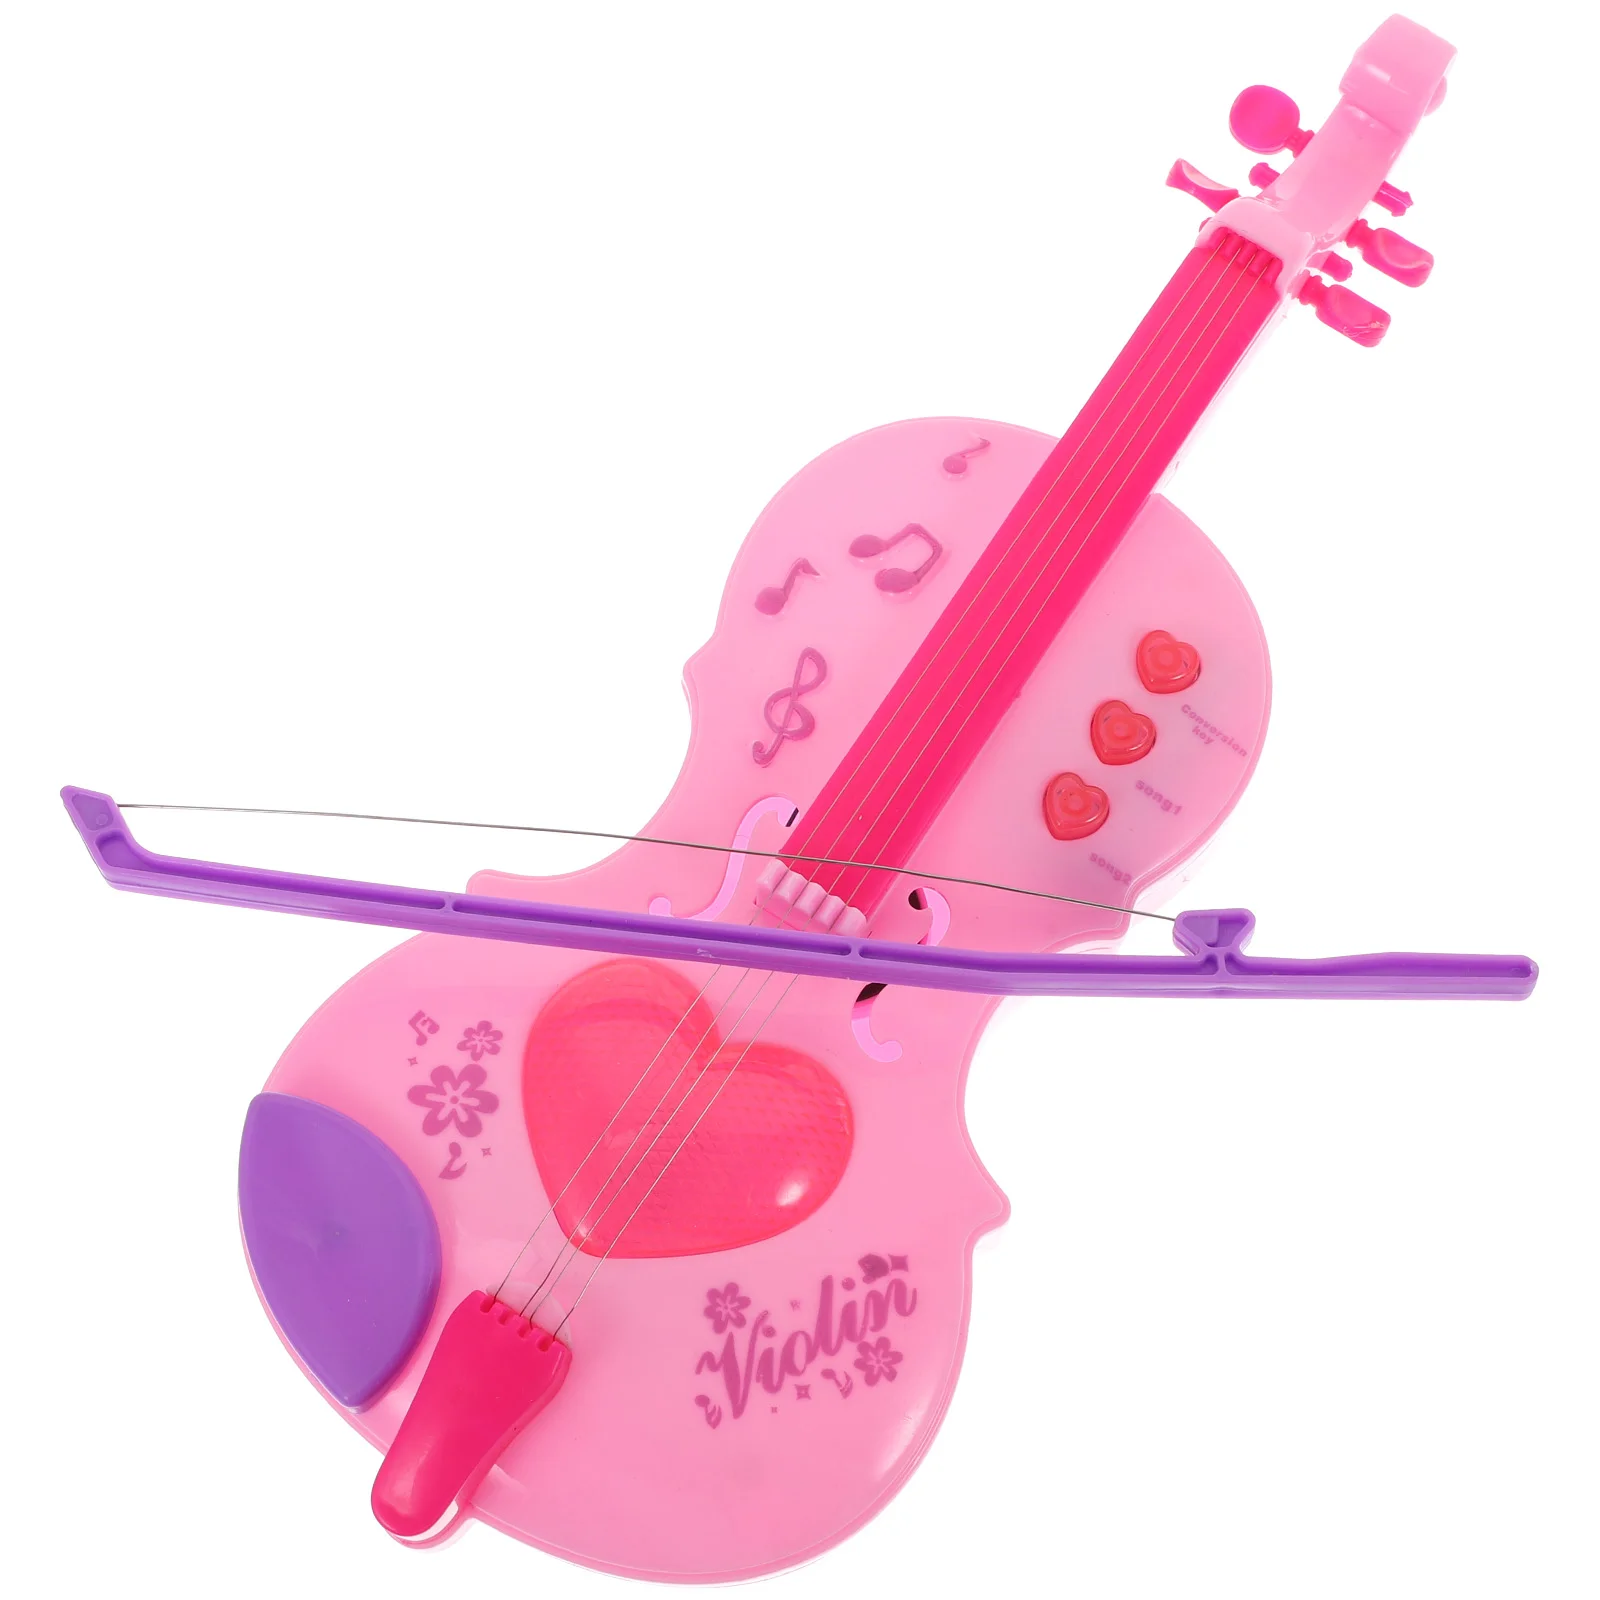 

Imitation Violin Children Plaything Kids Music Enlightenment Toy Educational Instrument Plastic Girl Toddler Toys Piano For